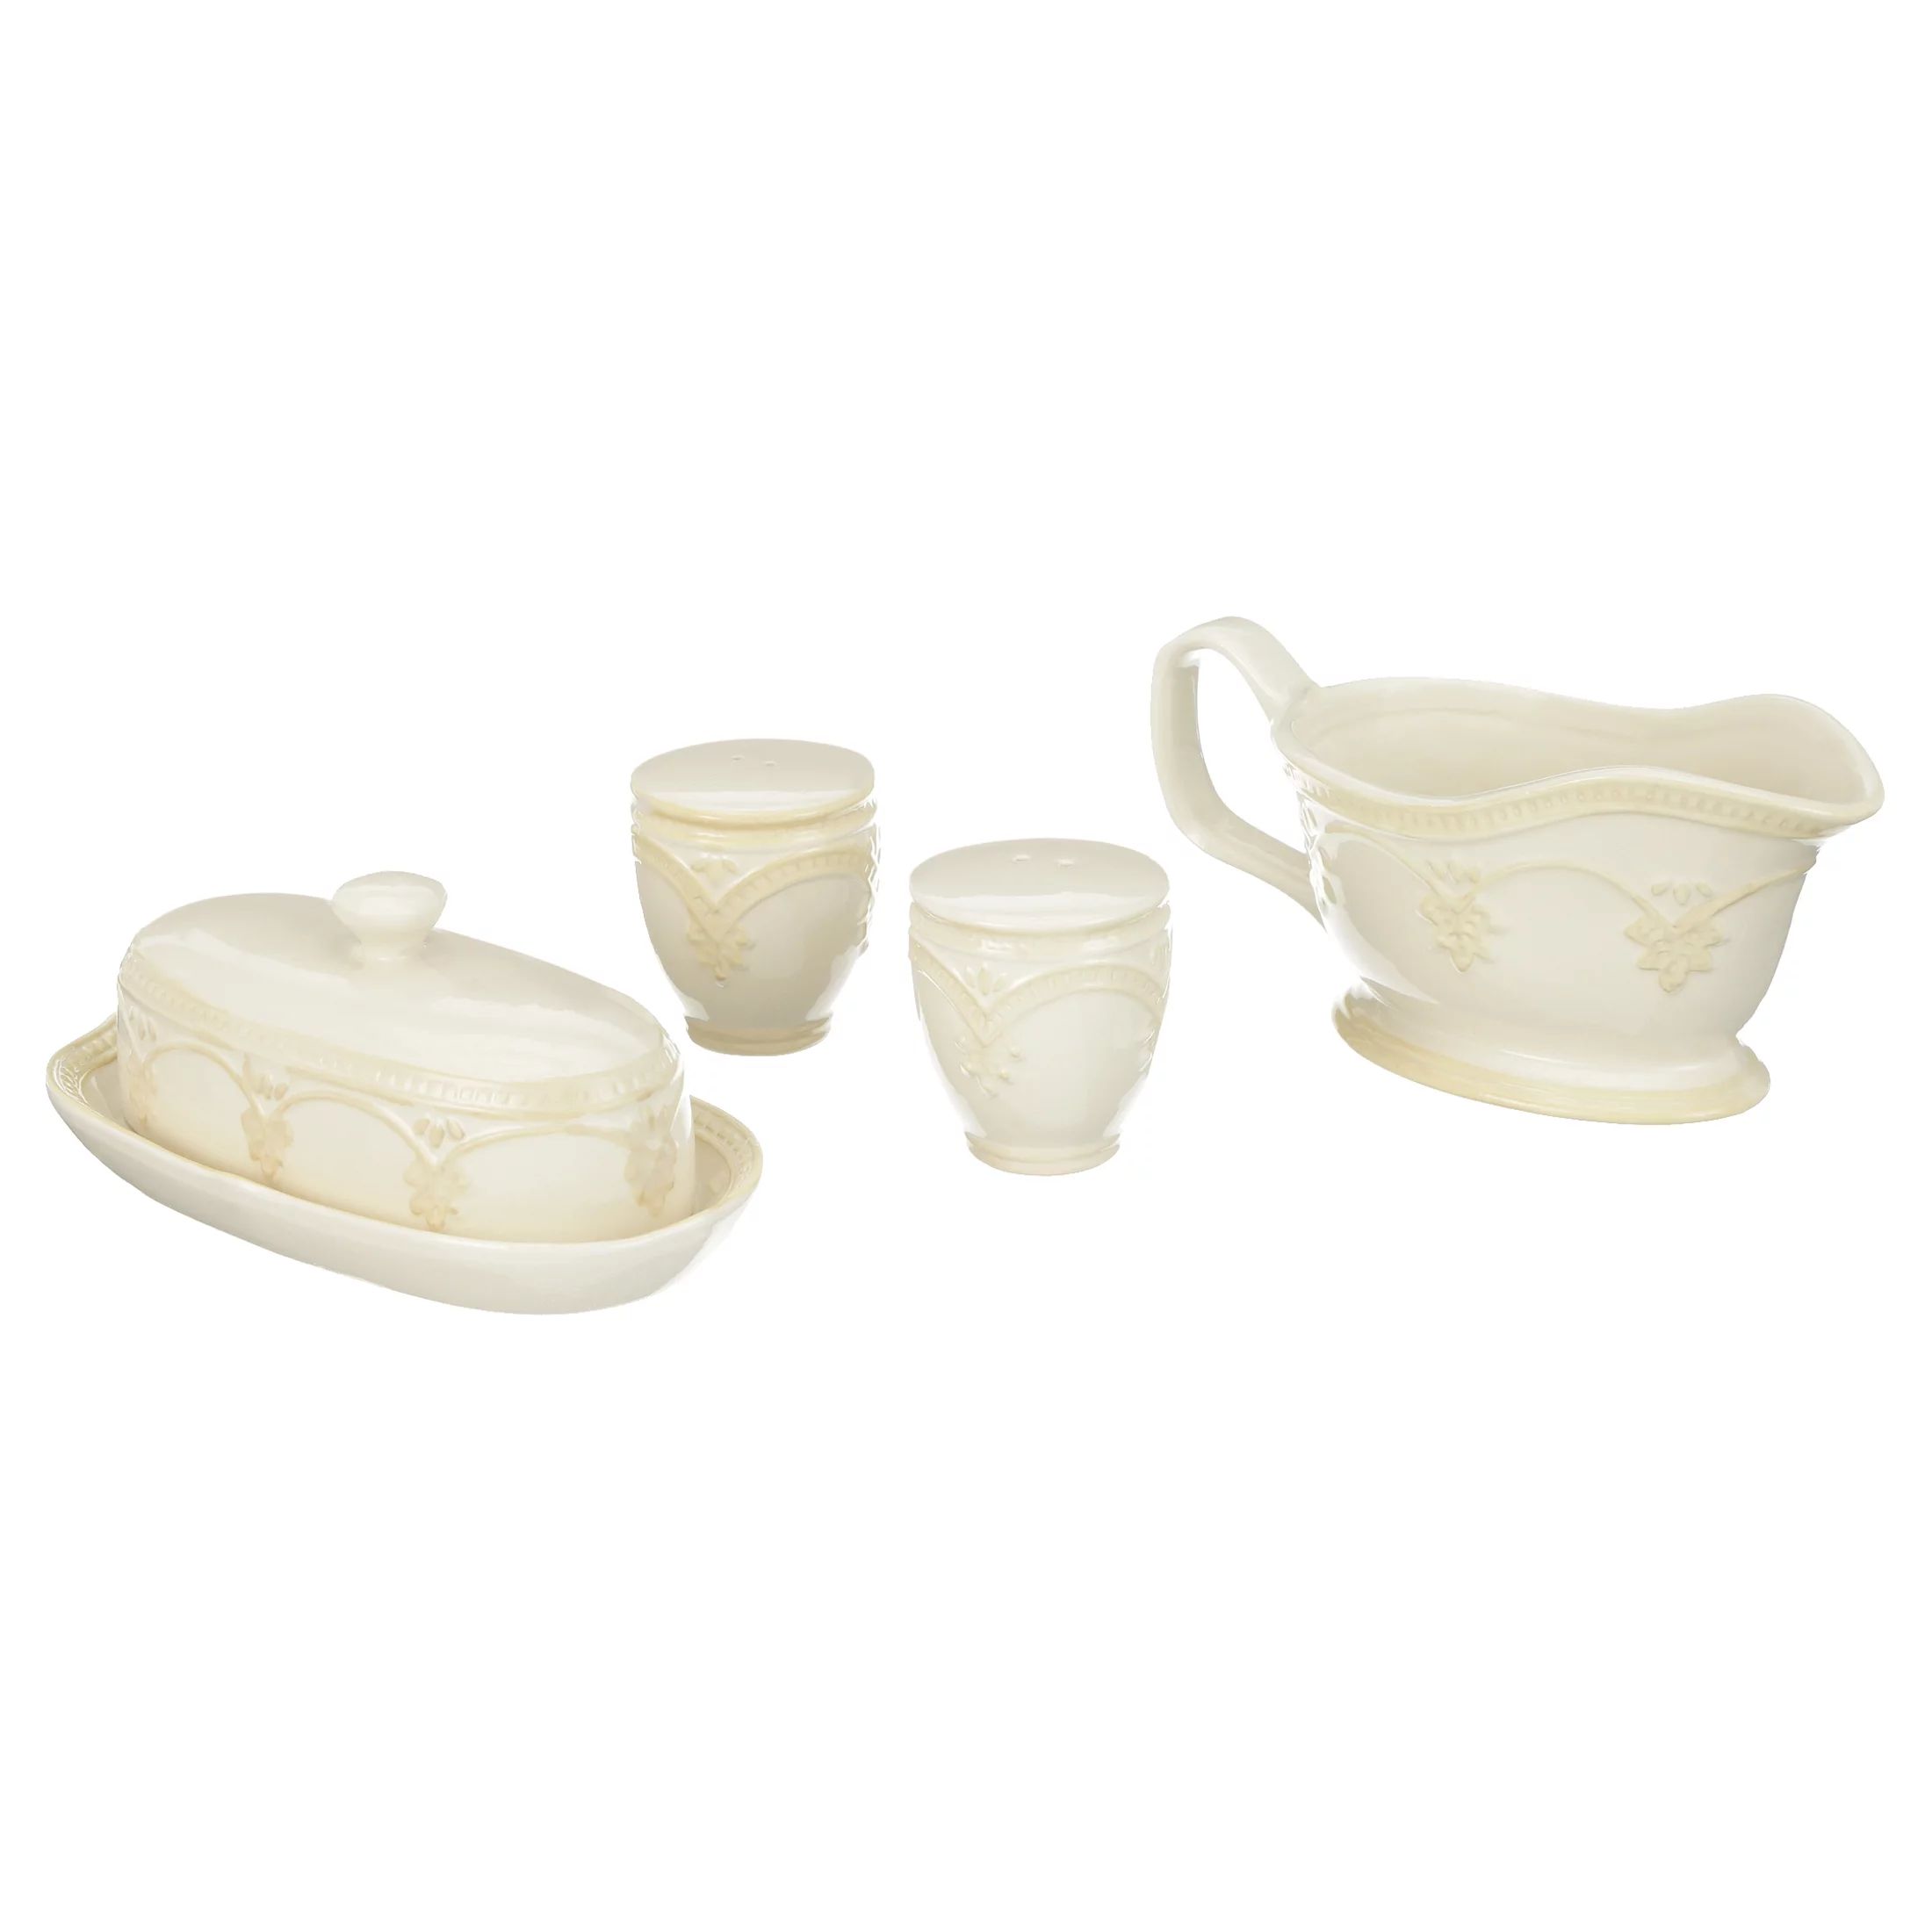 The Pioneer Woman Farmhouse Lace Butter Dish with Gravy Boat and Salt & Pepper Shakers | Walmart (US)